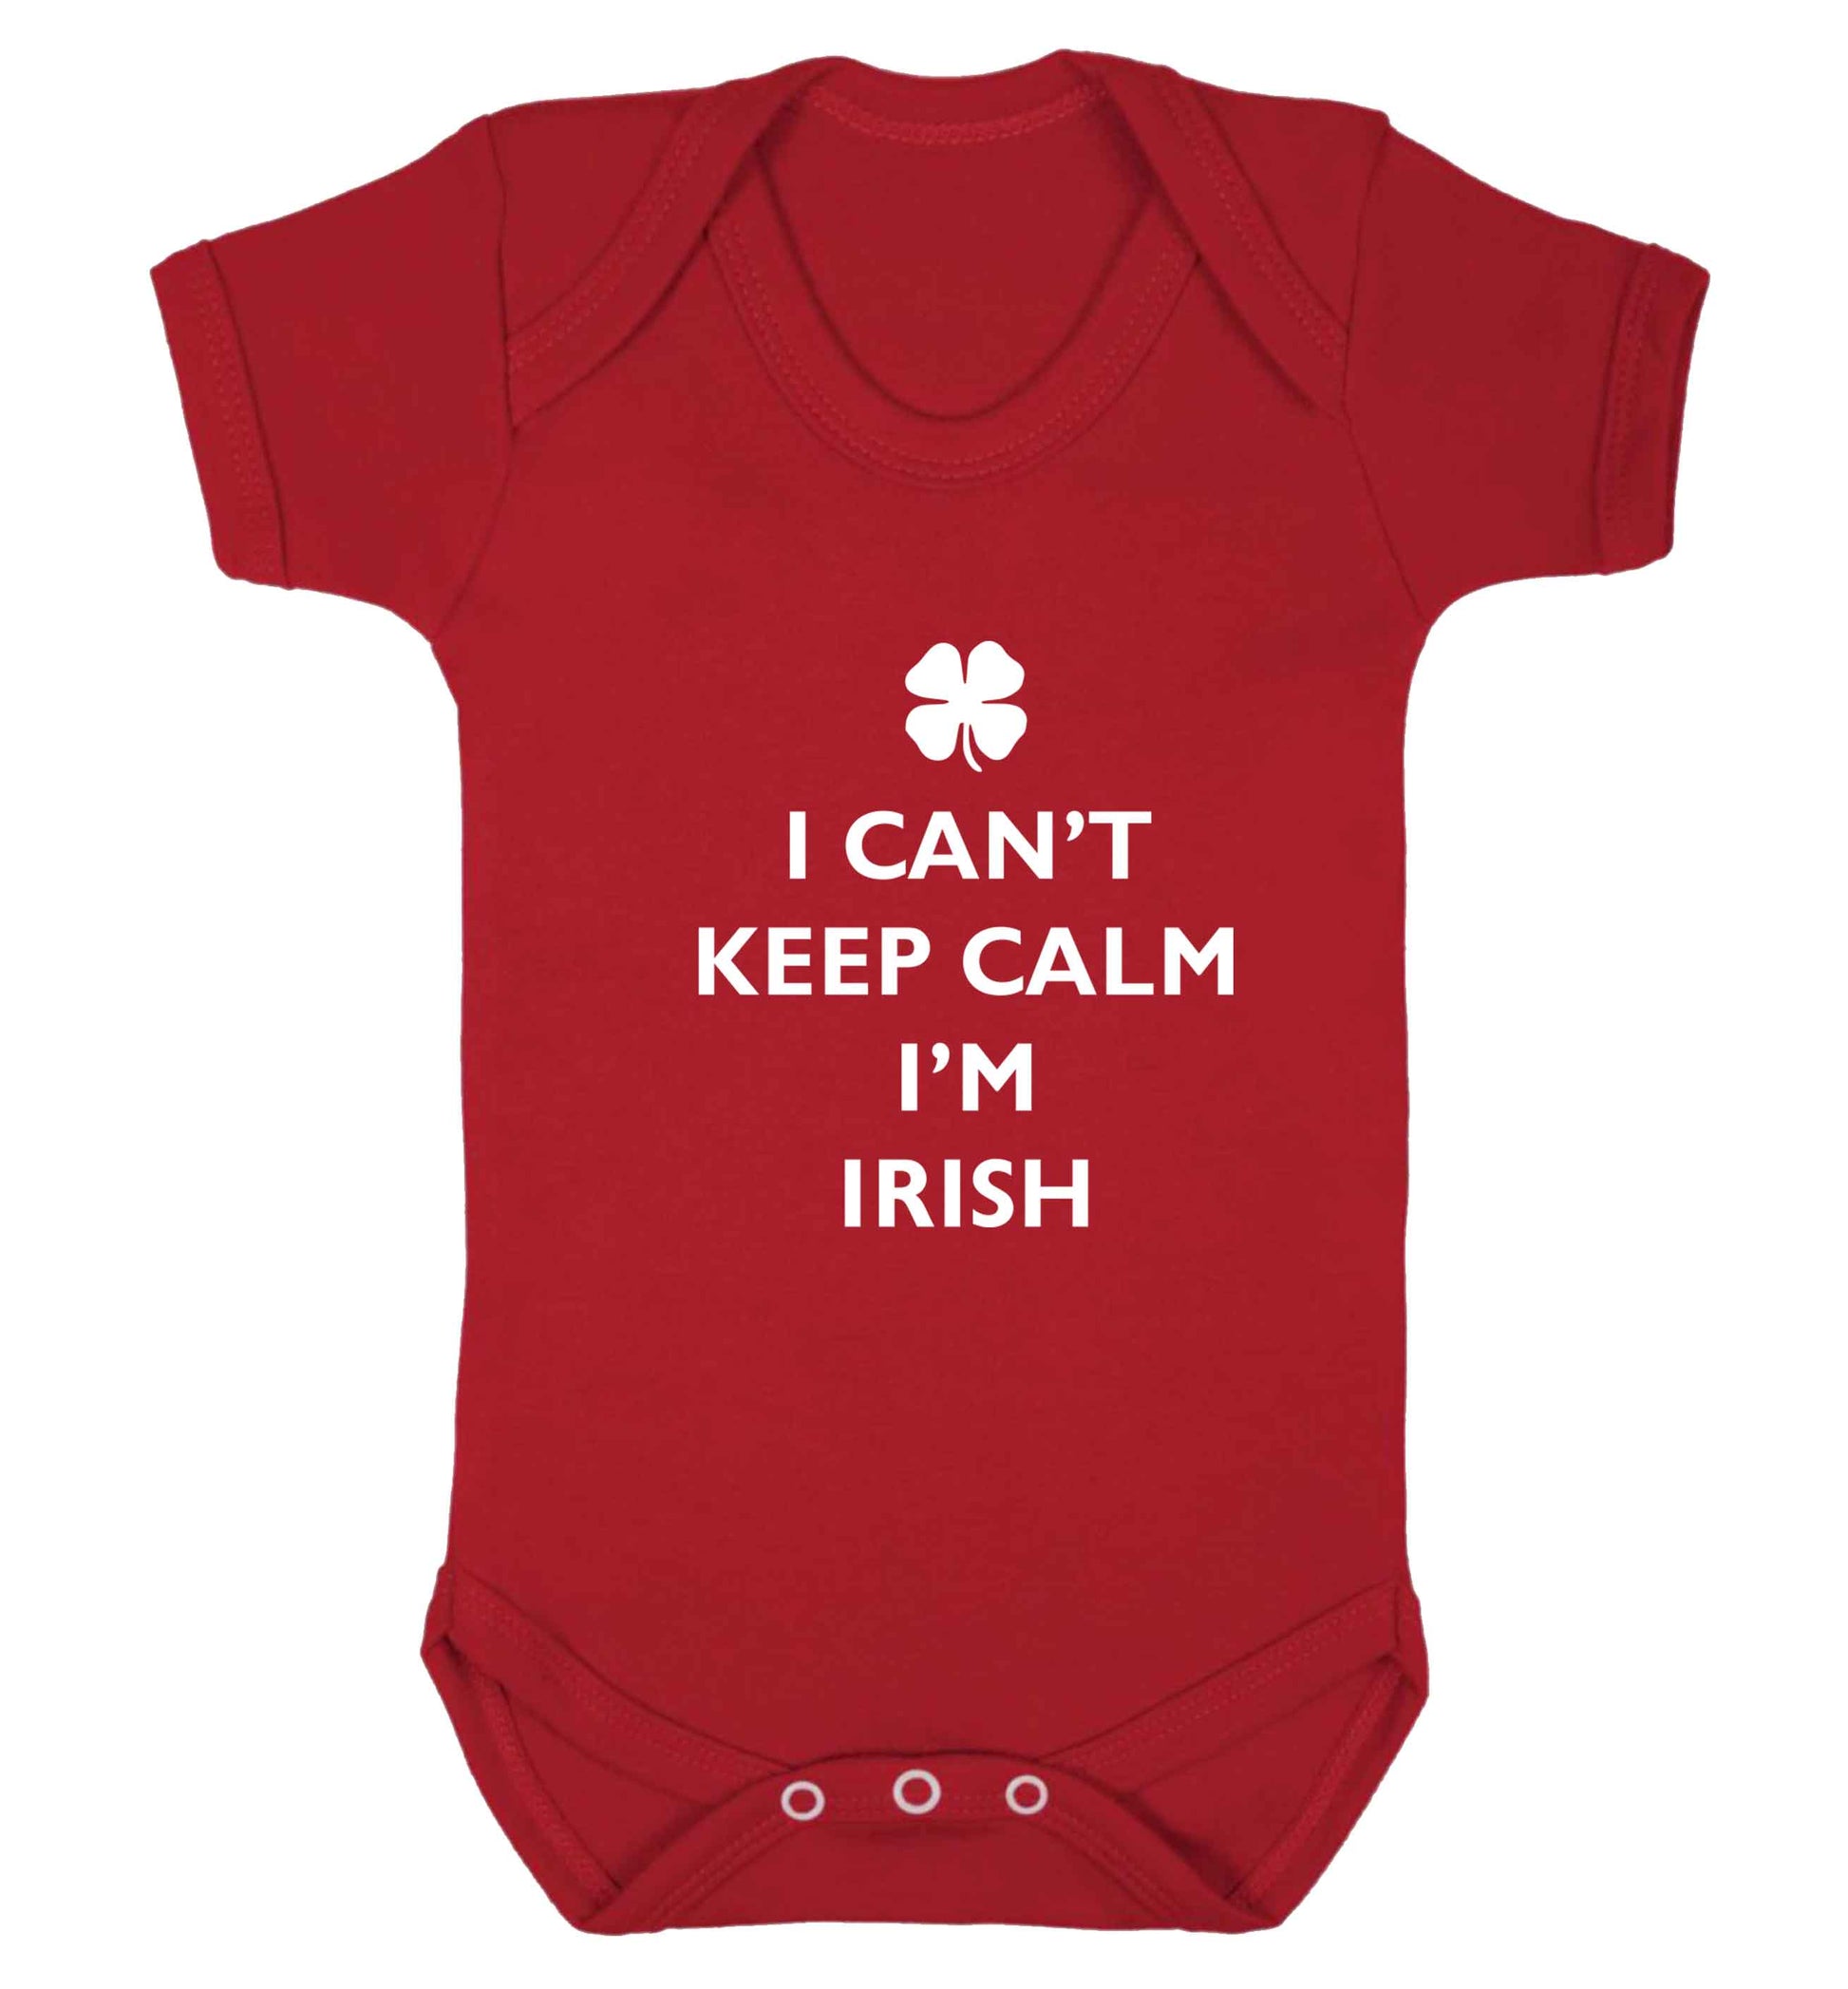 I can't keep calm I'm Irish baby vest red 18-24 months